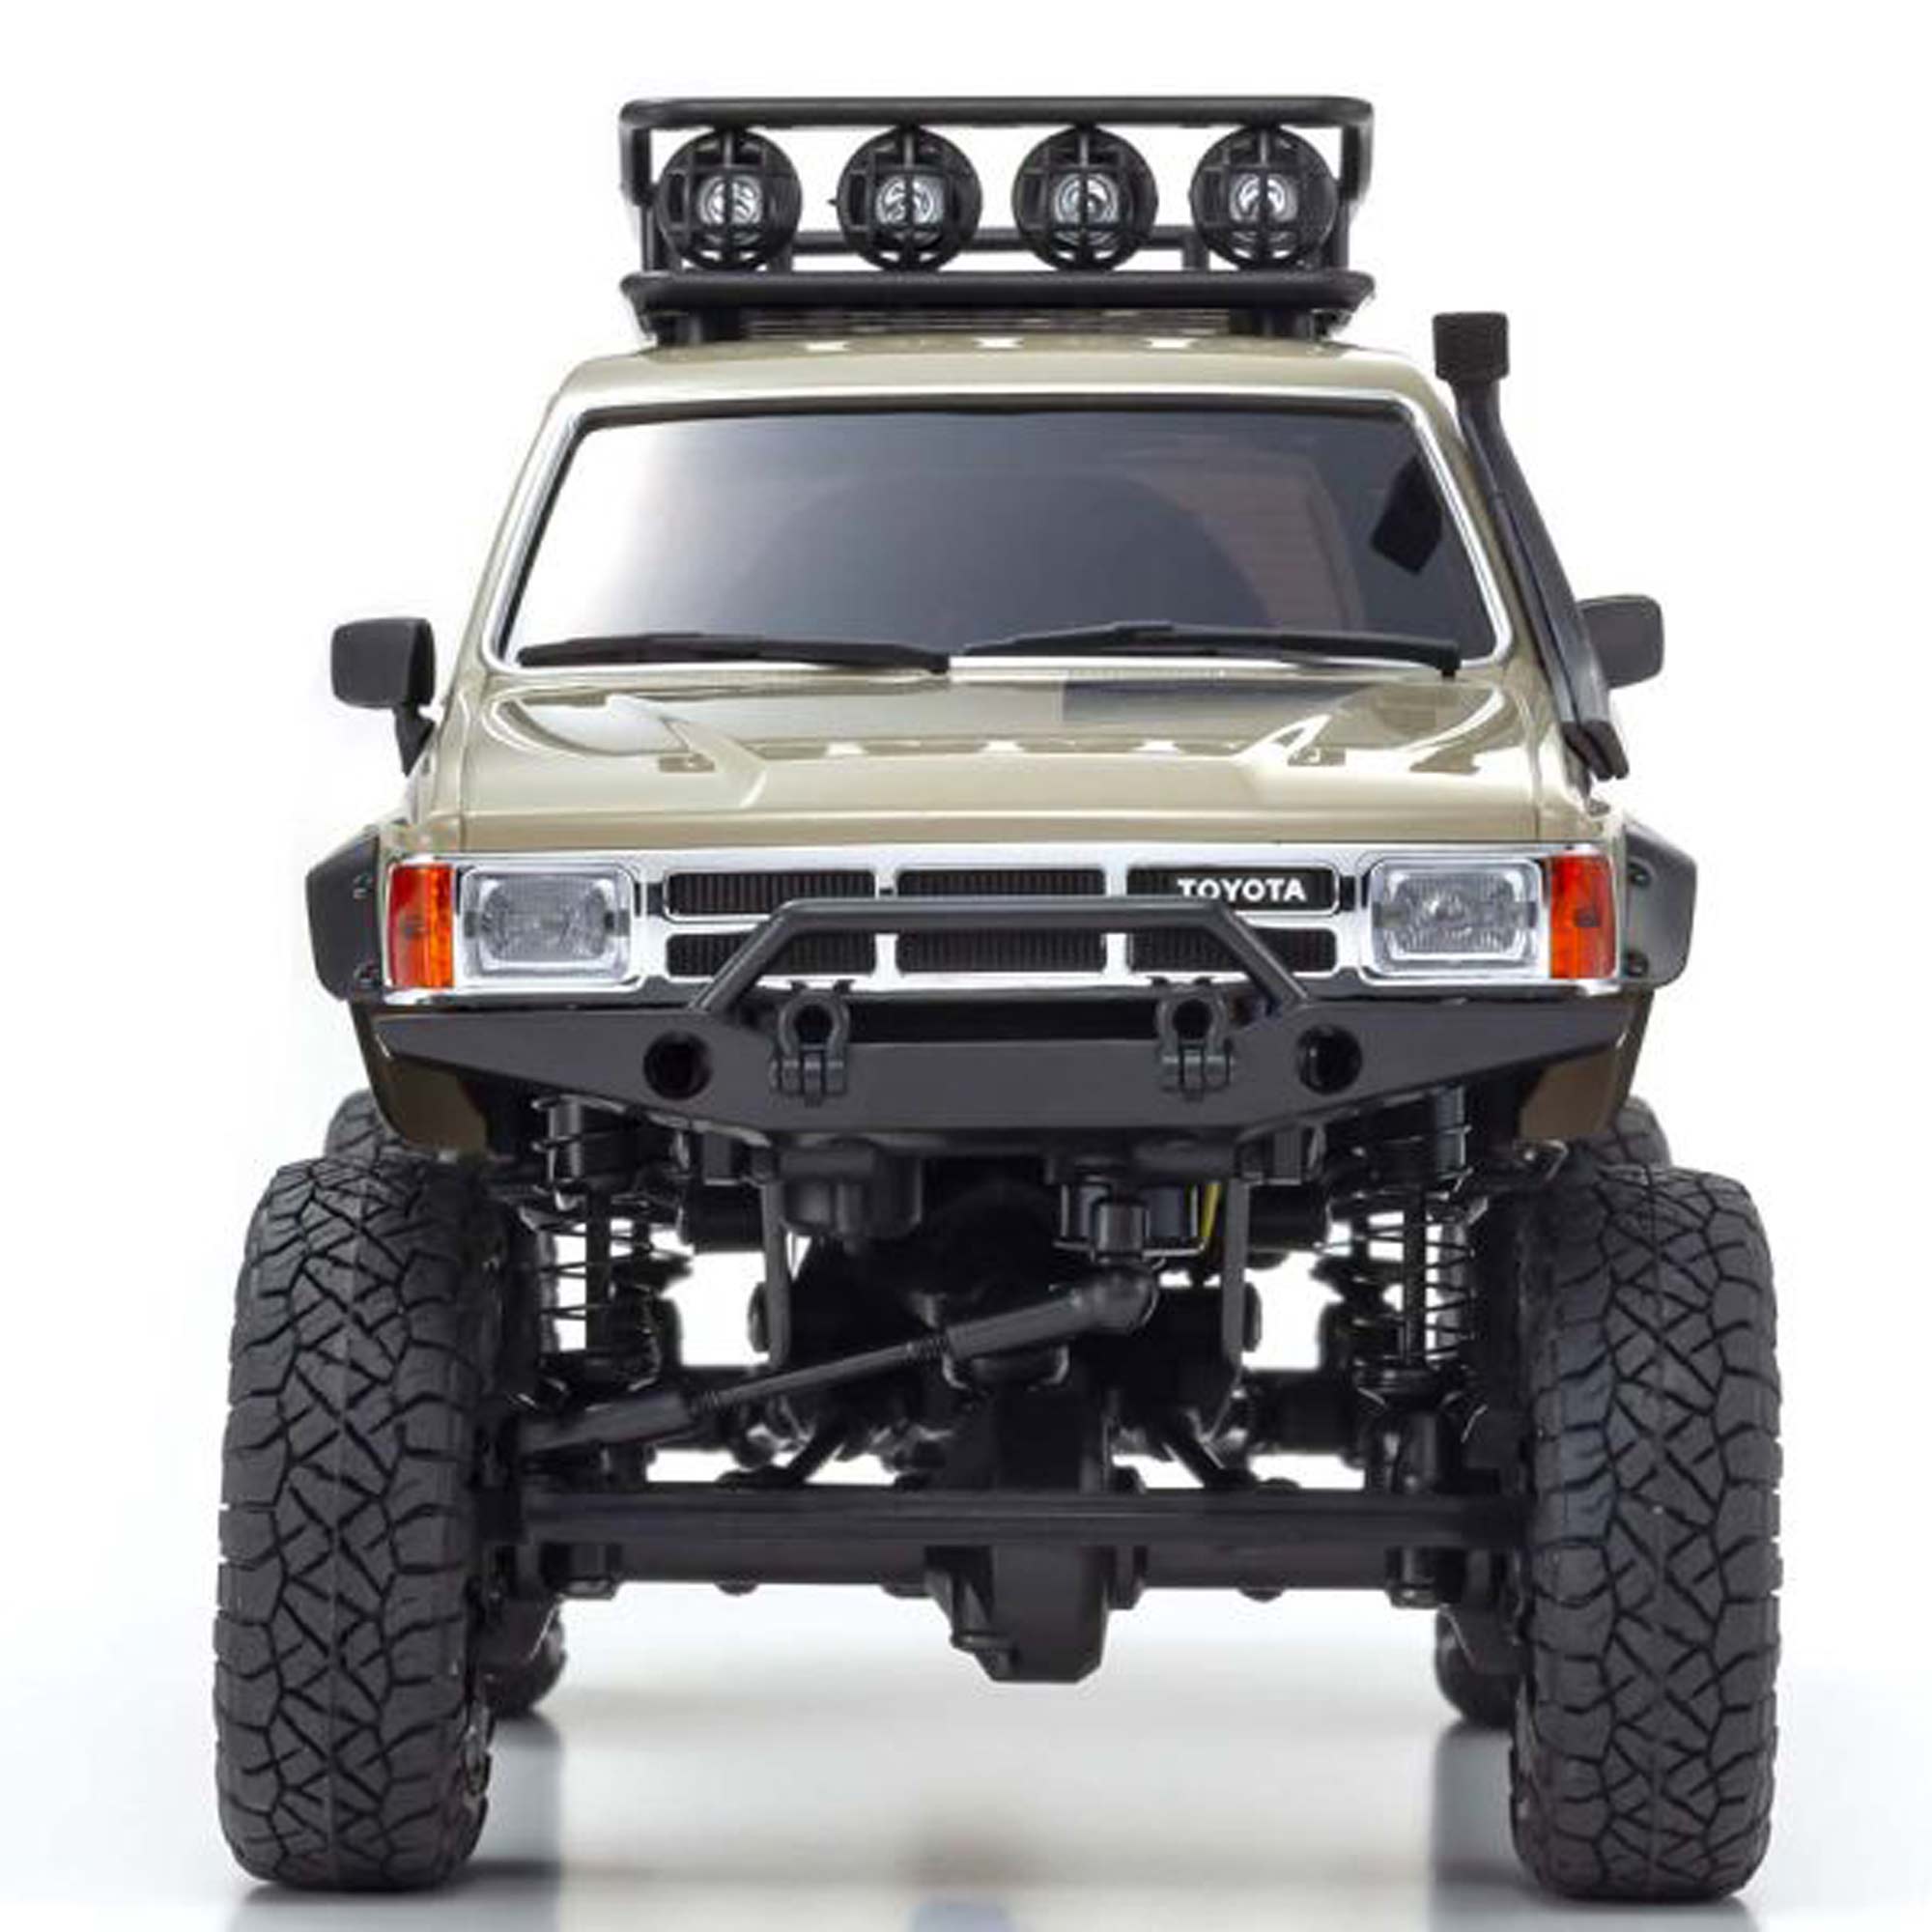 MINI-Z 4WD Toyota 4 Runner with Roof Rack RTR, Sand